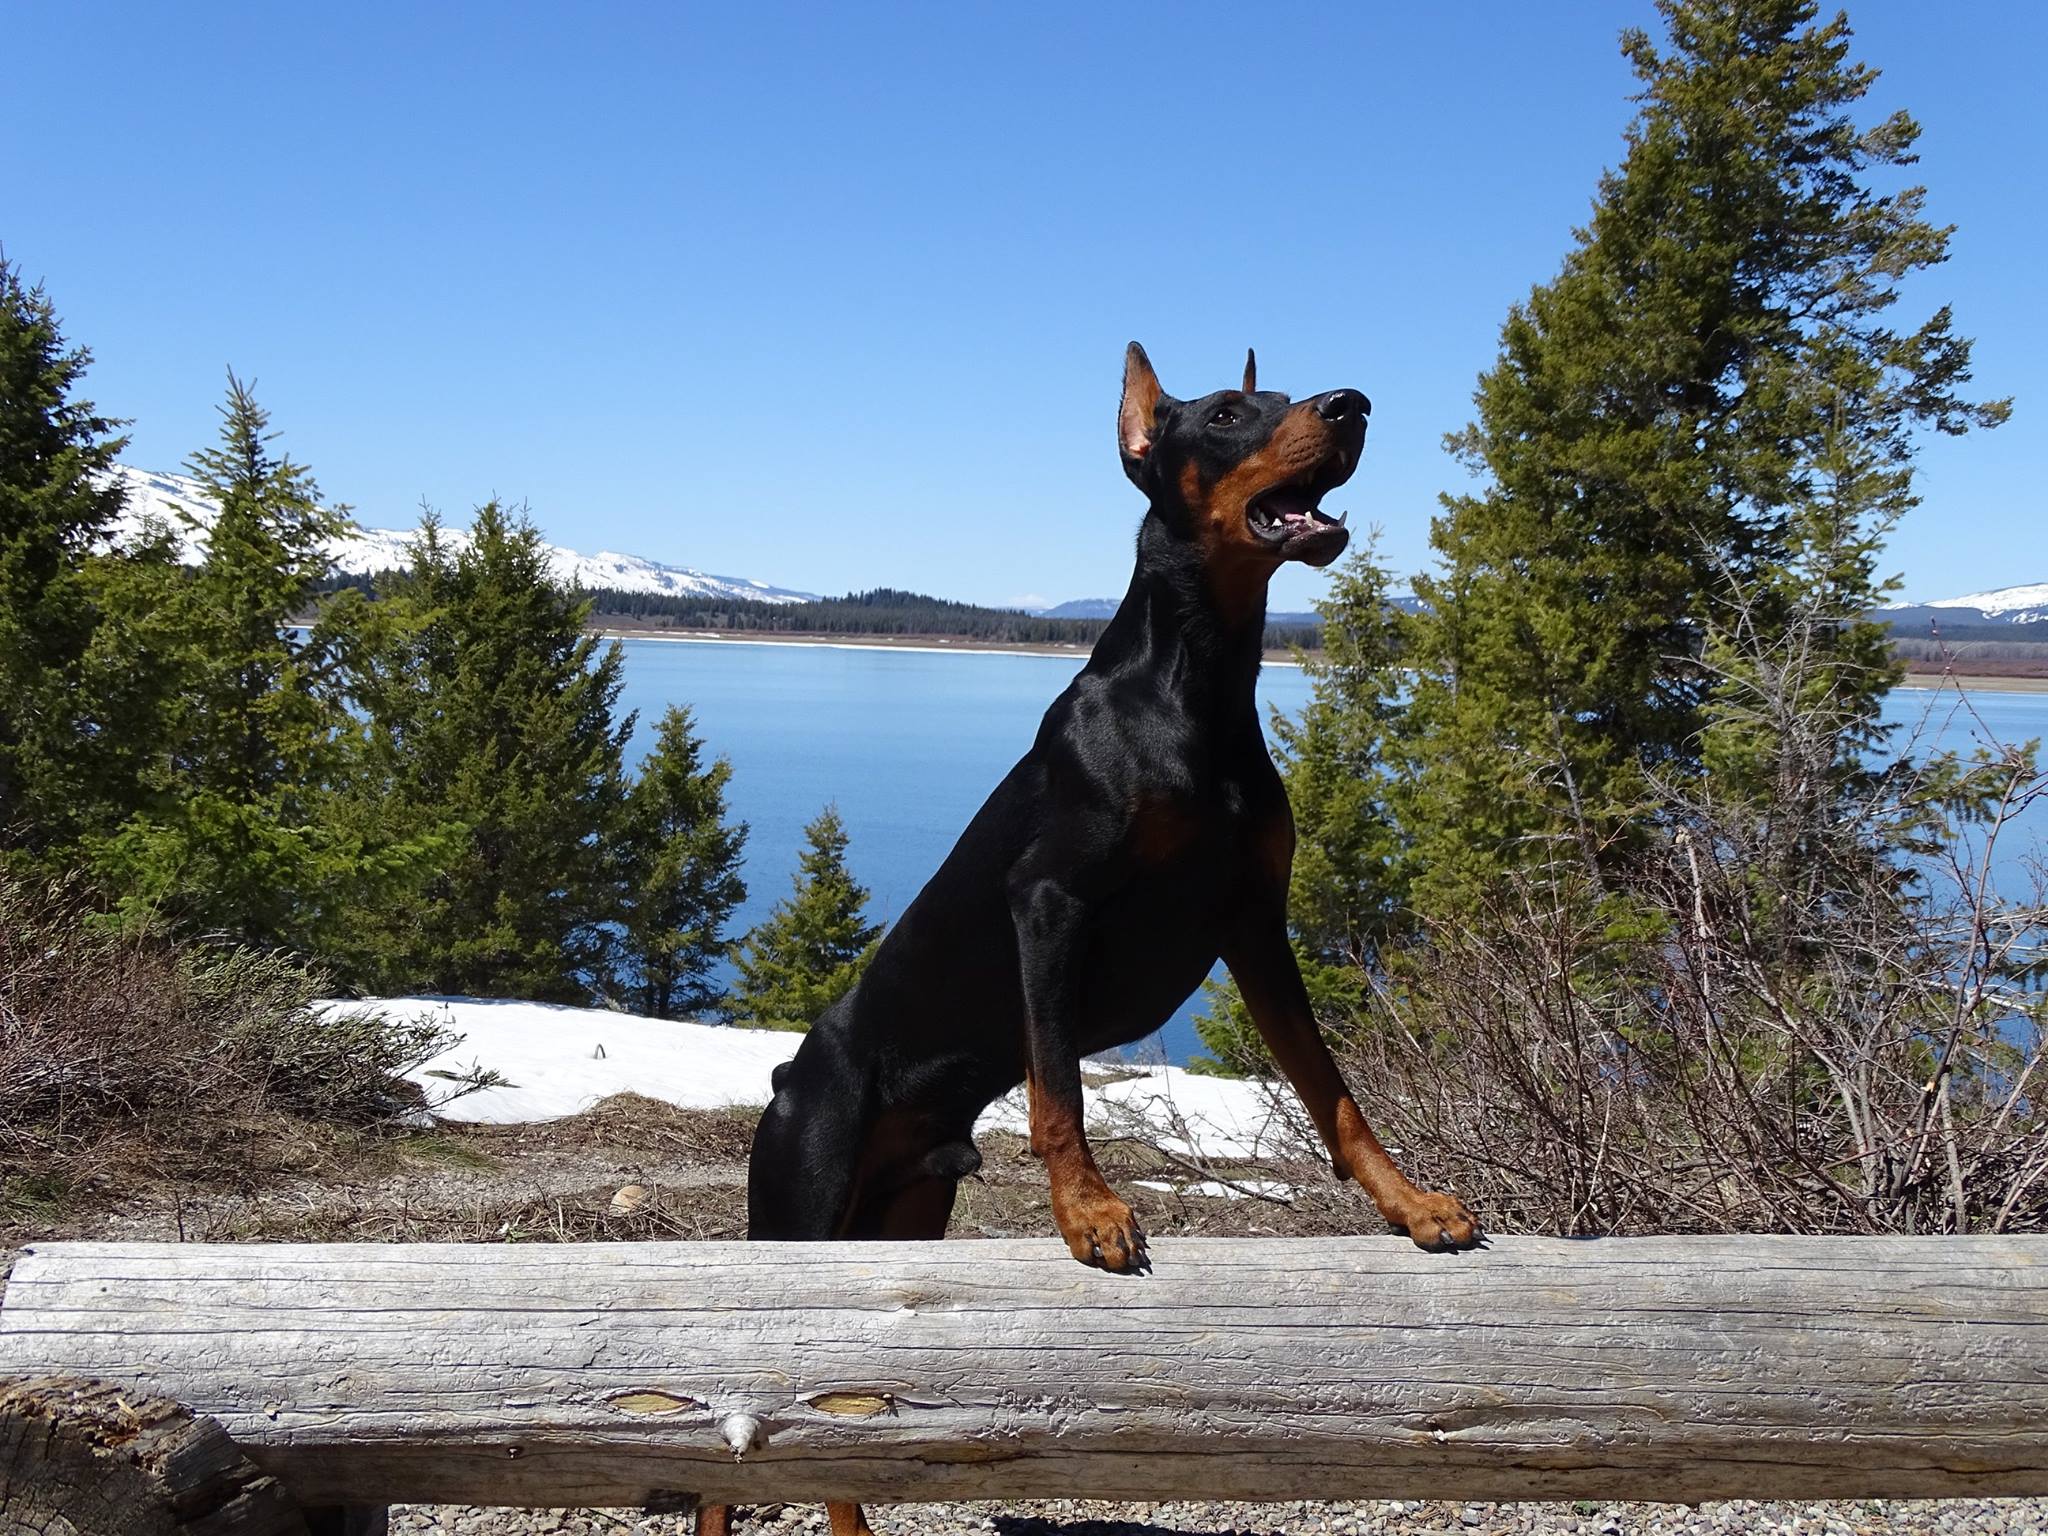 A Doberman Pinscher standing on the laid wood in the mountain while looking up